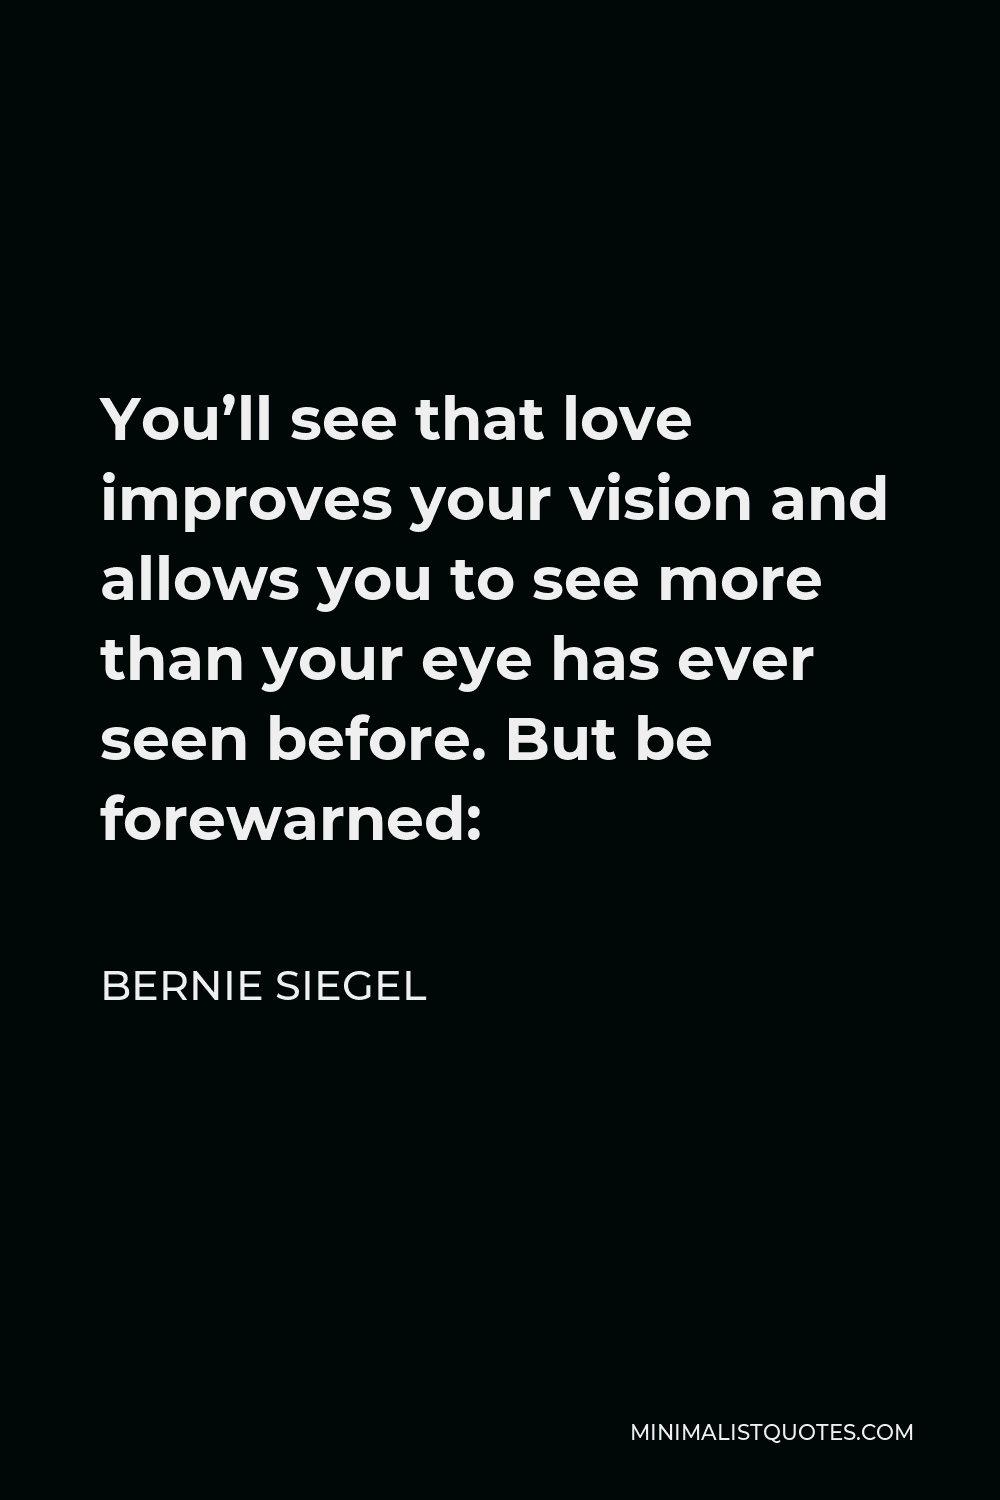 Bernie Siegel Quote - You’ll see that love improves your vision and allows you to see more than your eye has ever seen before. But be forewarned: